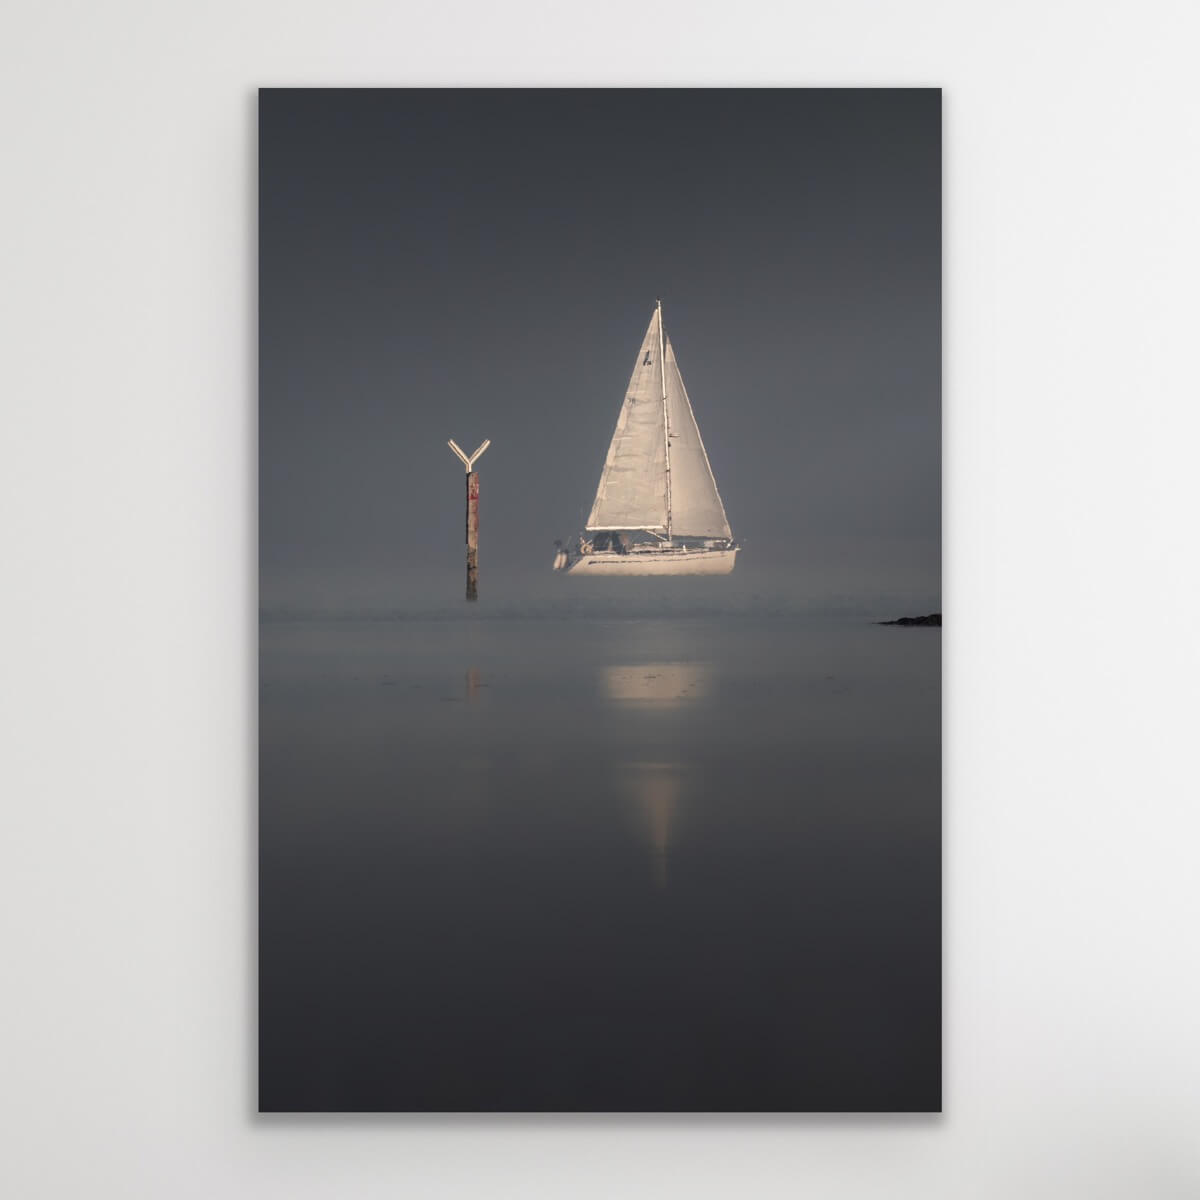 Newtown Creek Sailing Boat Yacht Photograph Gallery Isle of Wight Landscape Prints